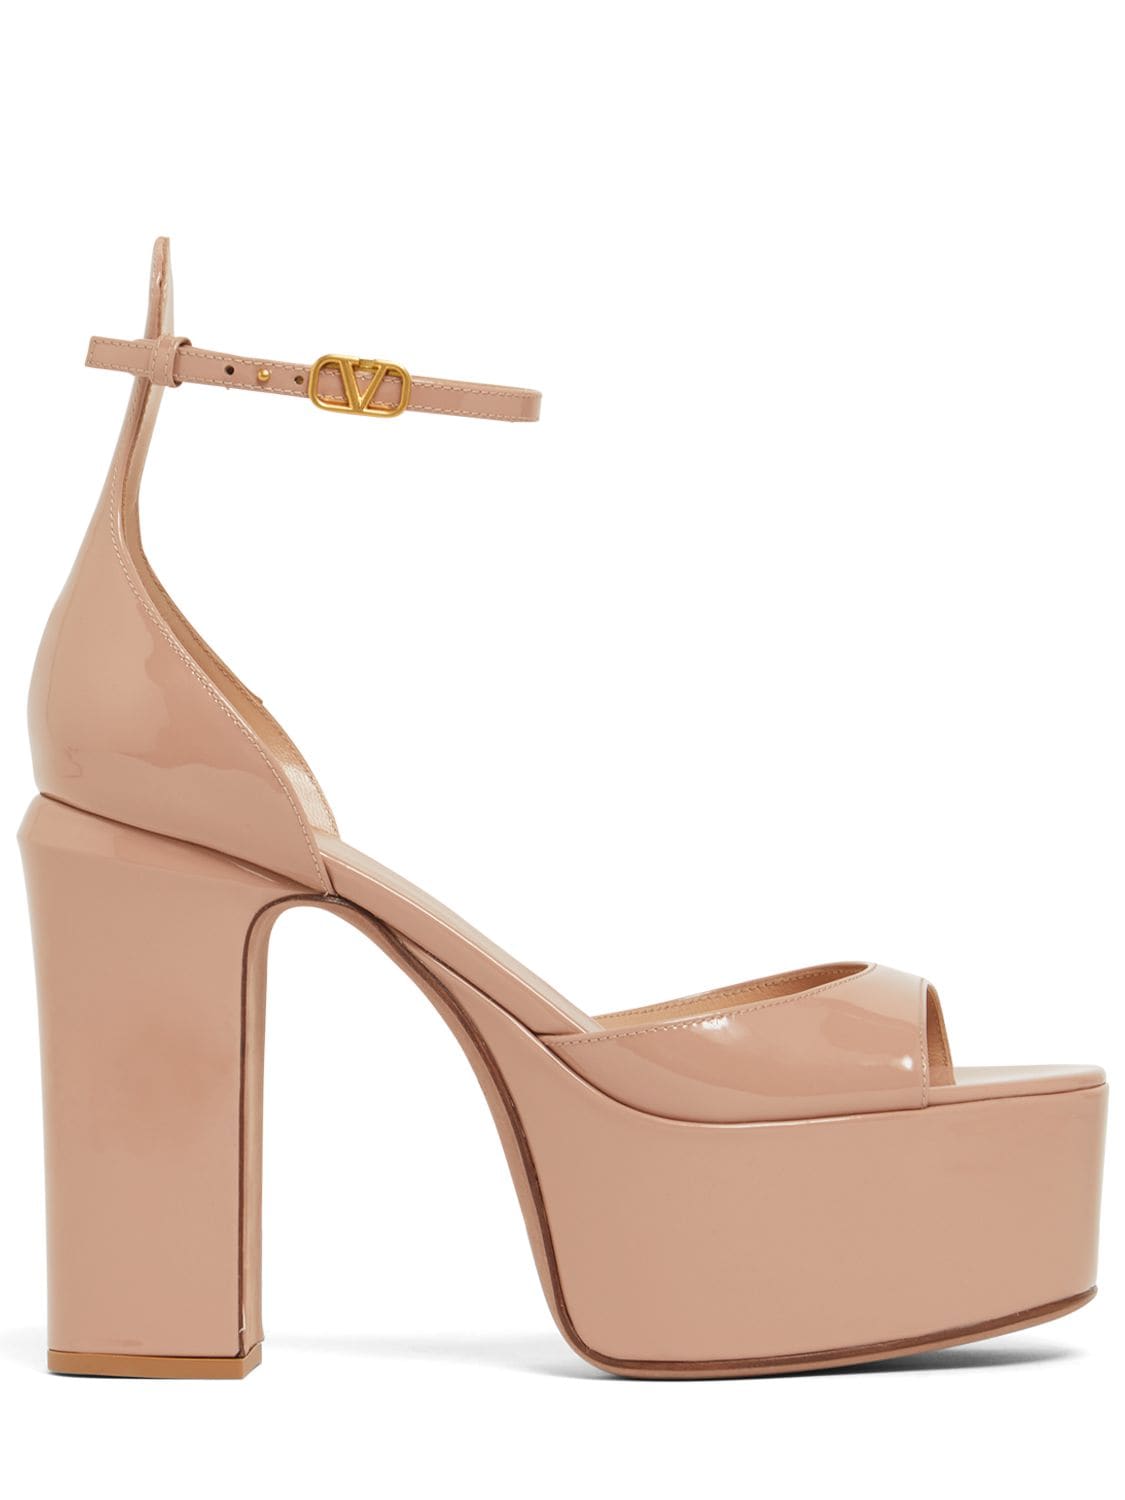 Image of 120mm Tan-go Patent Leather Sandals